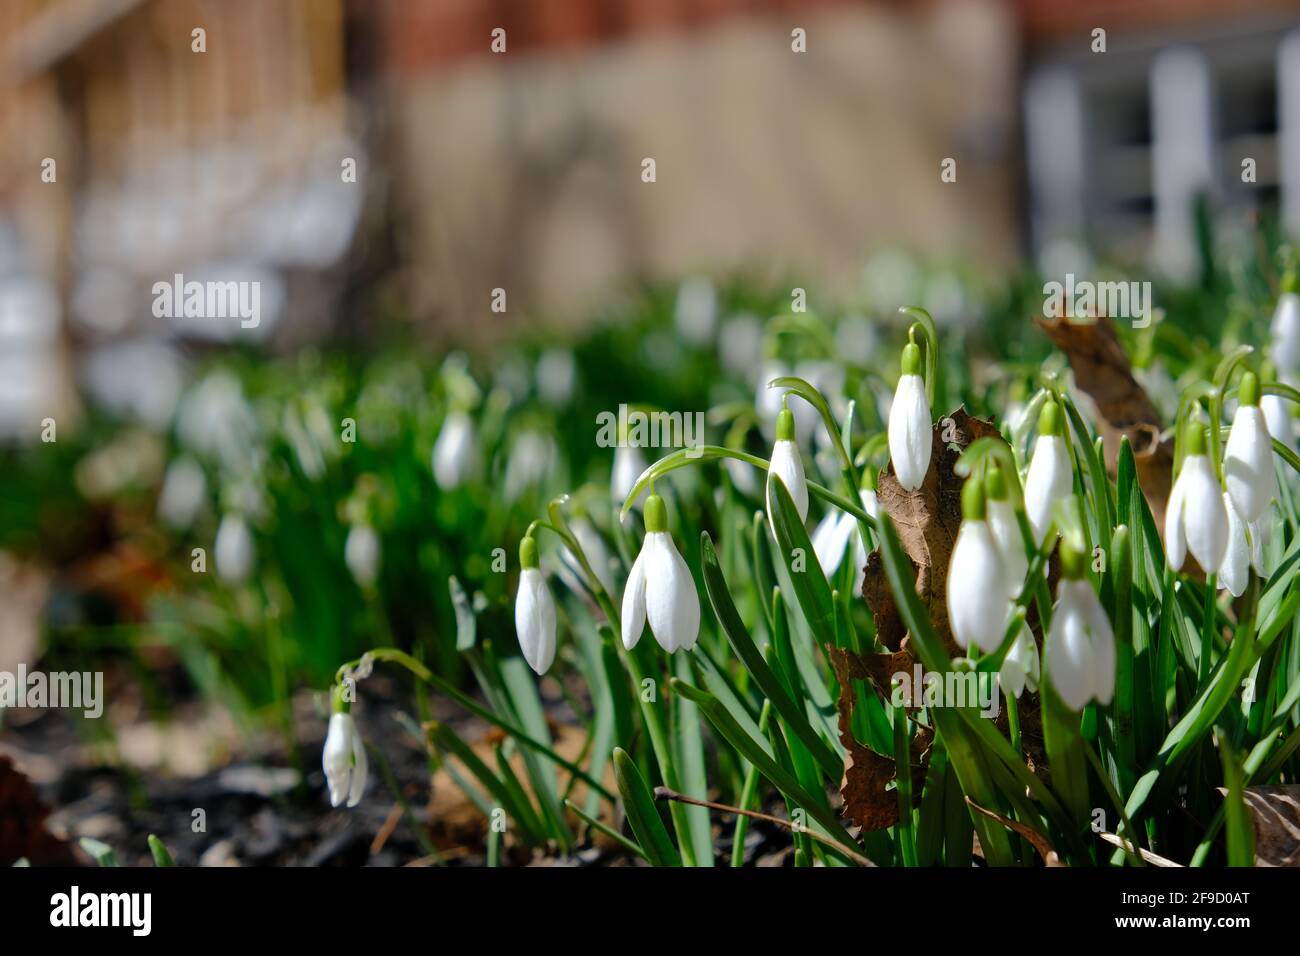 Lovely white drooping flowers of a cluster of snowdrops (Galanthus nivalis) in a Glebe garden in early spring. Ottawa, Ontario, Canada. Stock Photo